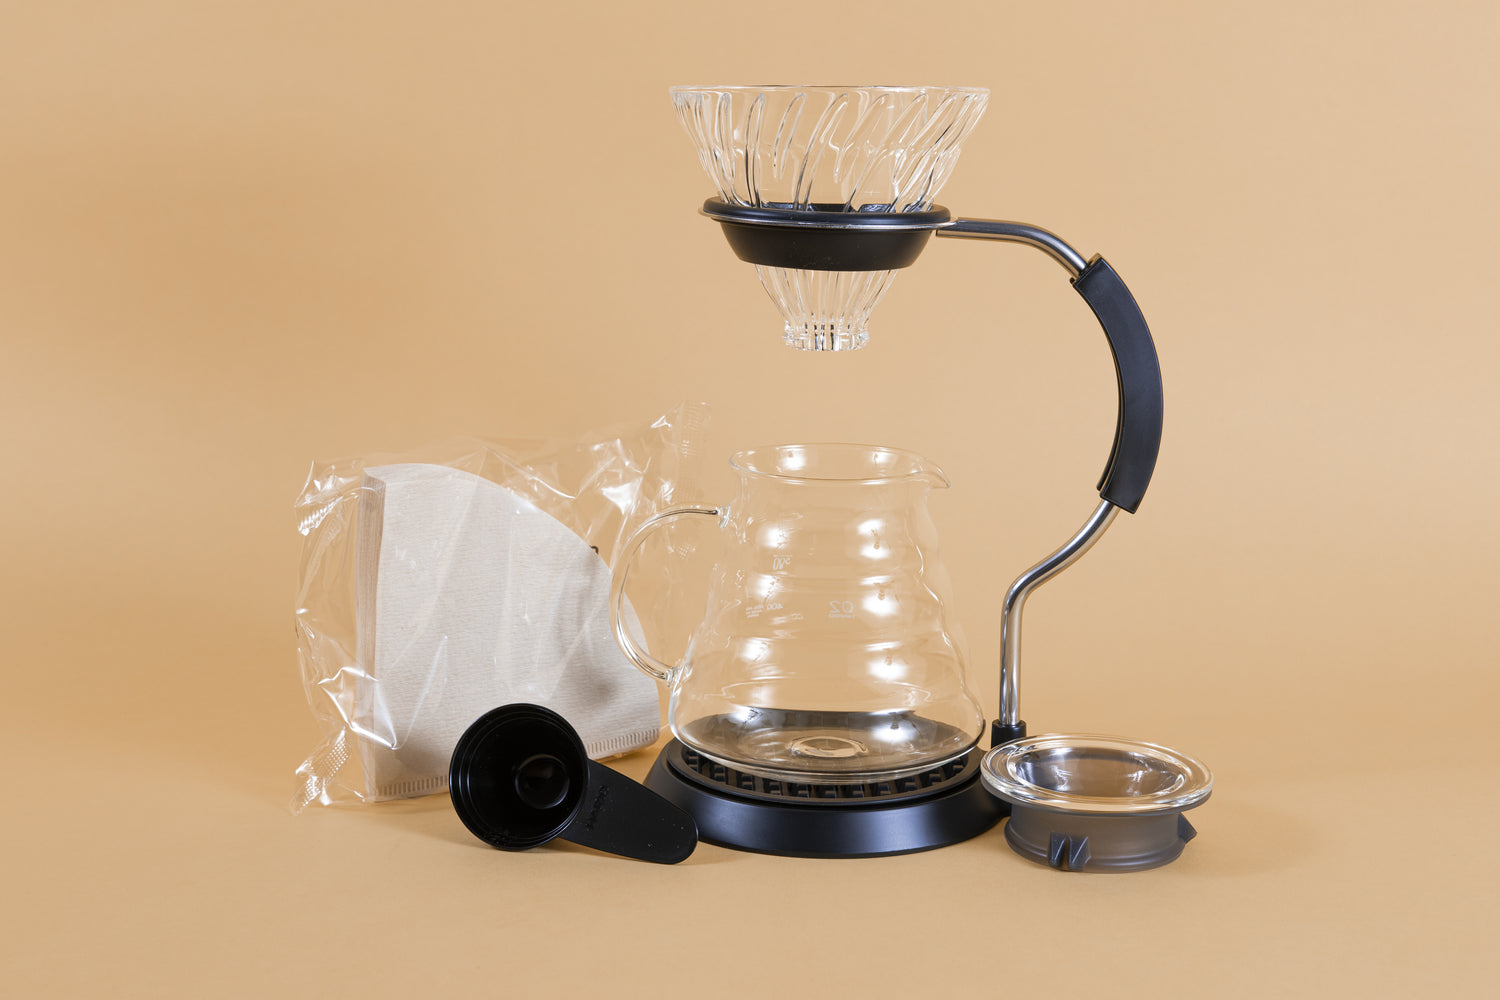 All glass cone shaped coffee dripper over an all glass coffee server with handle in a metal and rubberized plastic arm stand with a pack of filters, black plastic scoop, and server lid.